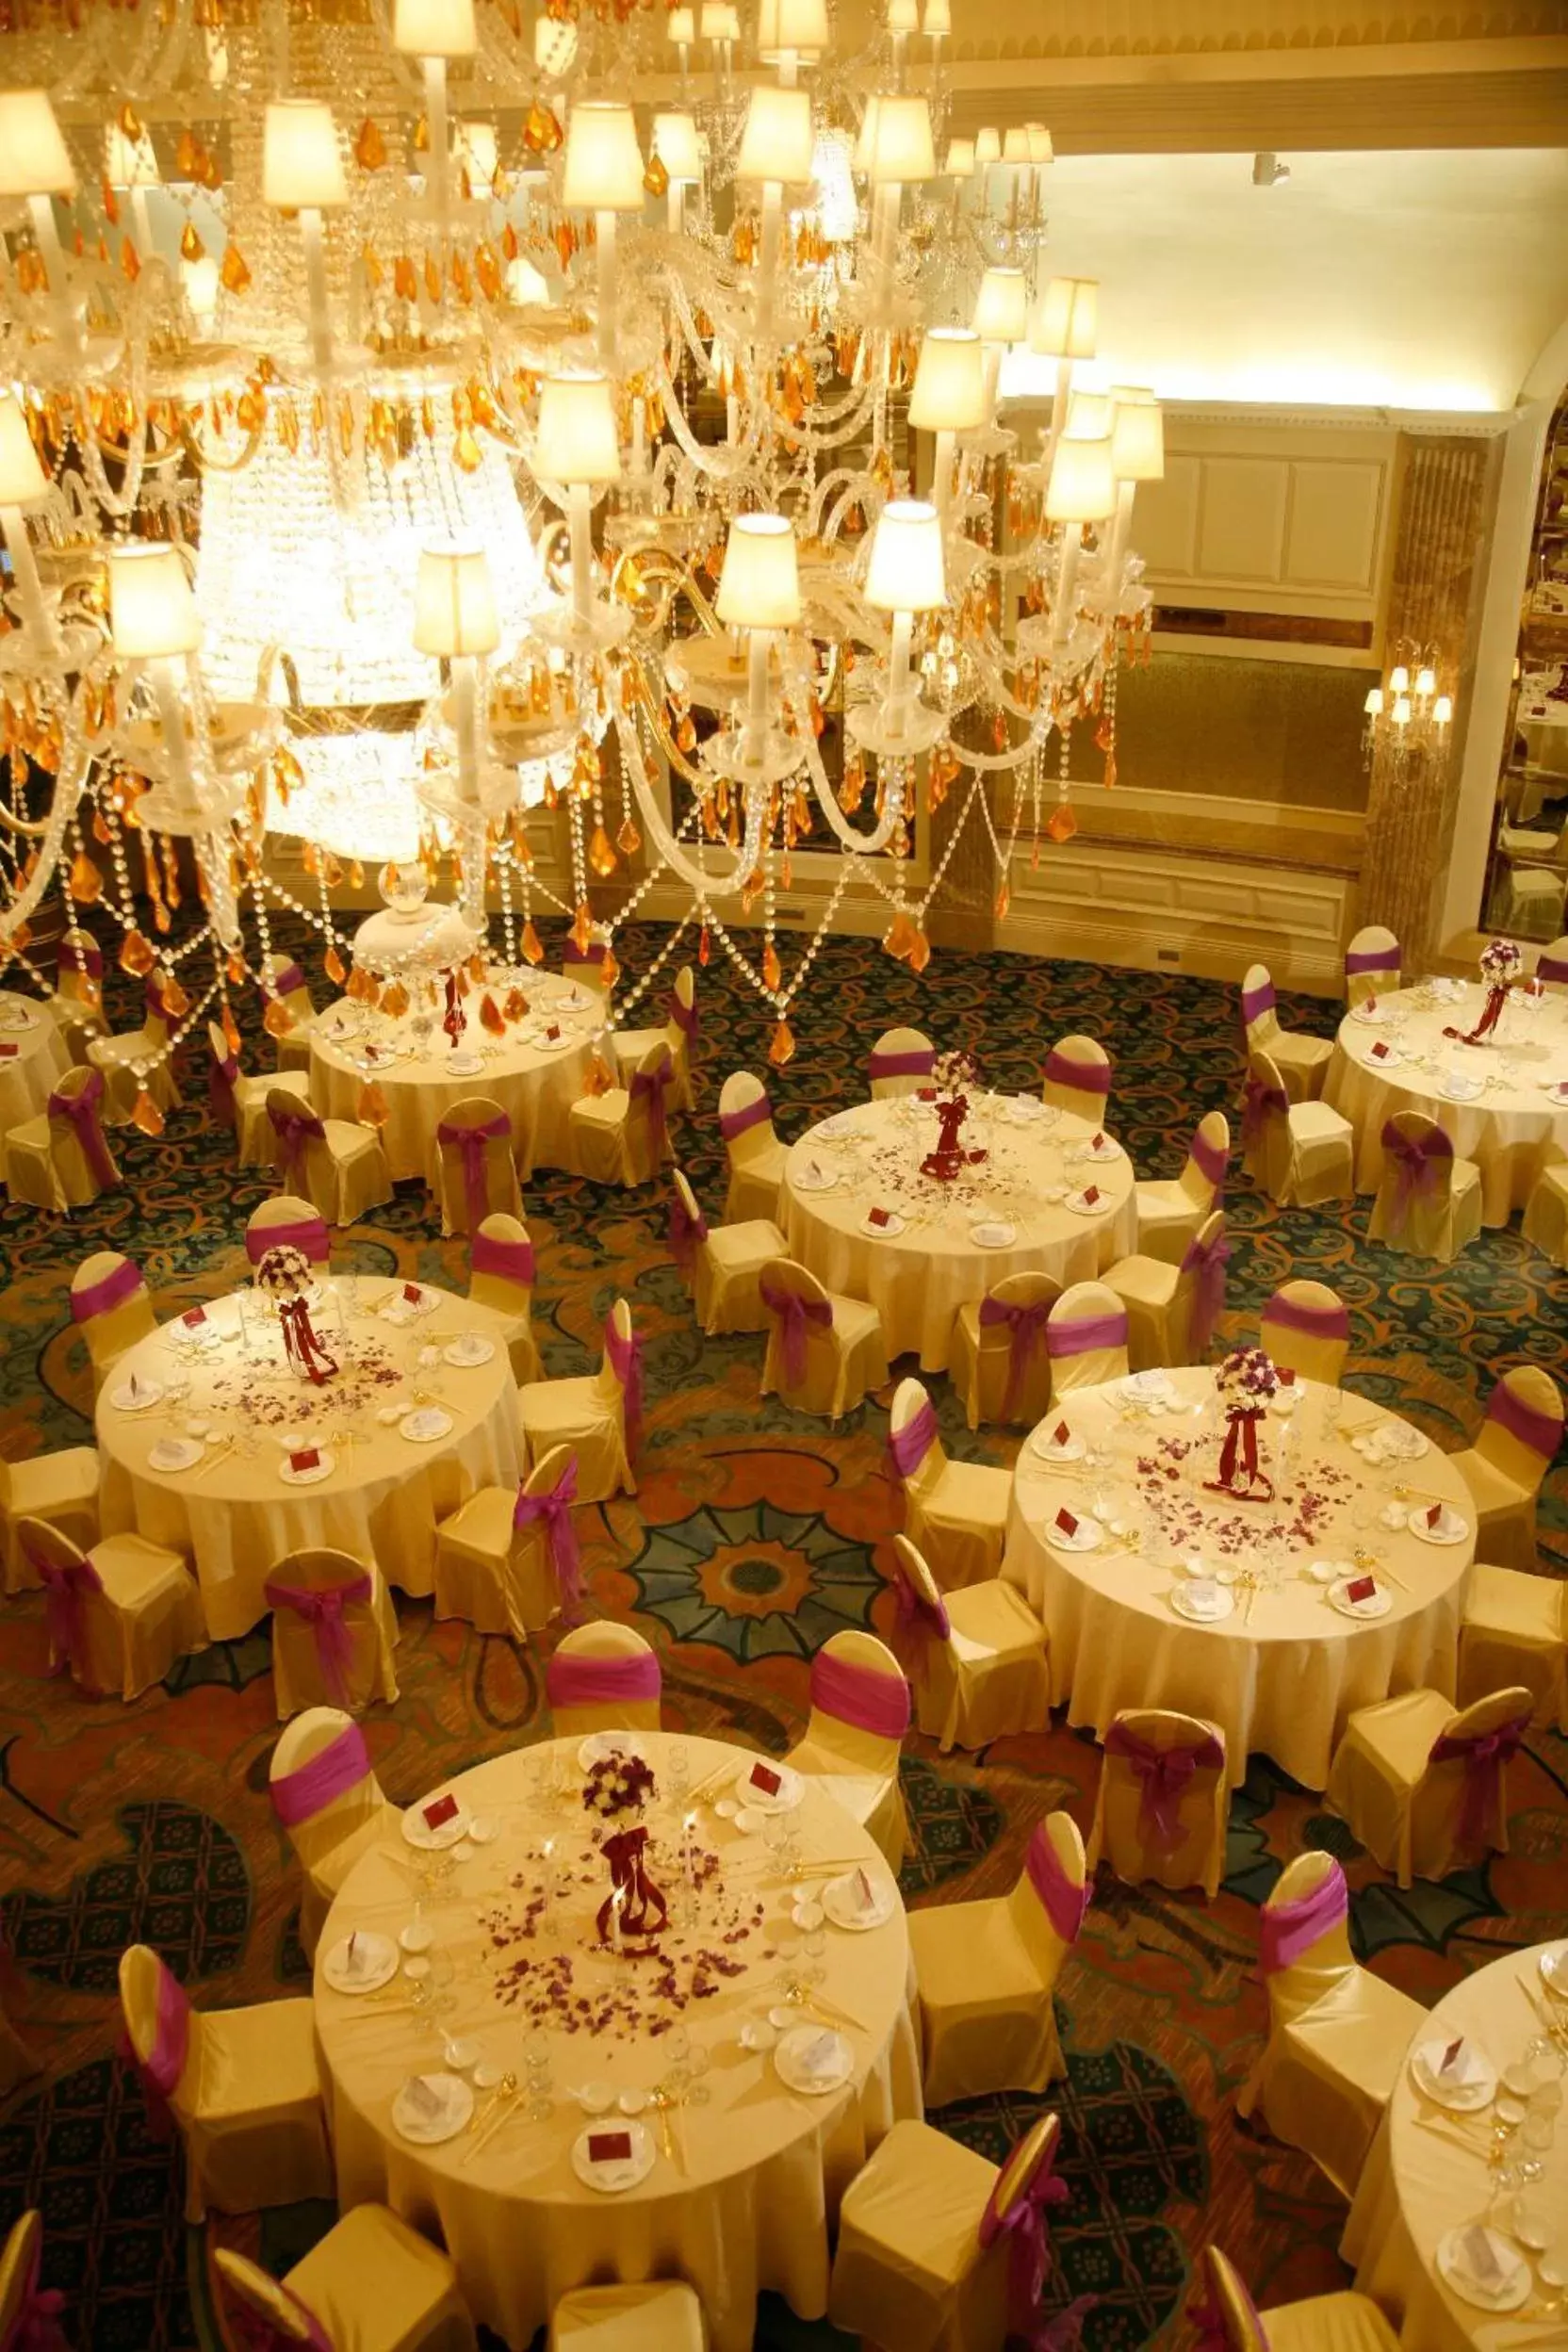 Banquet/Function facilities, Banquet Facilities in Grand Central Hotel Shanghai